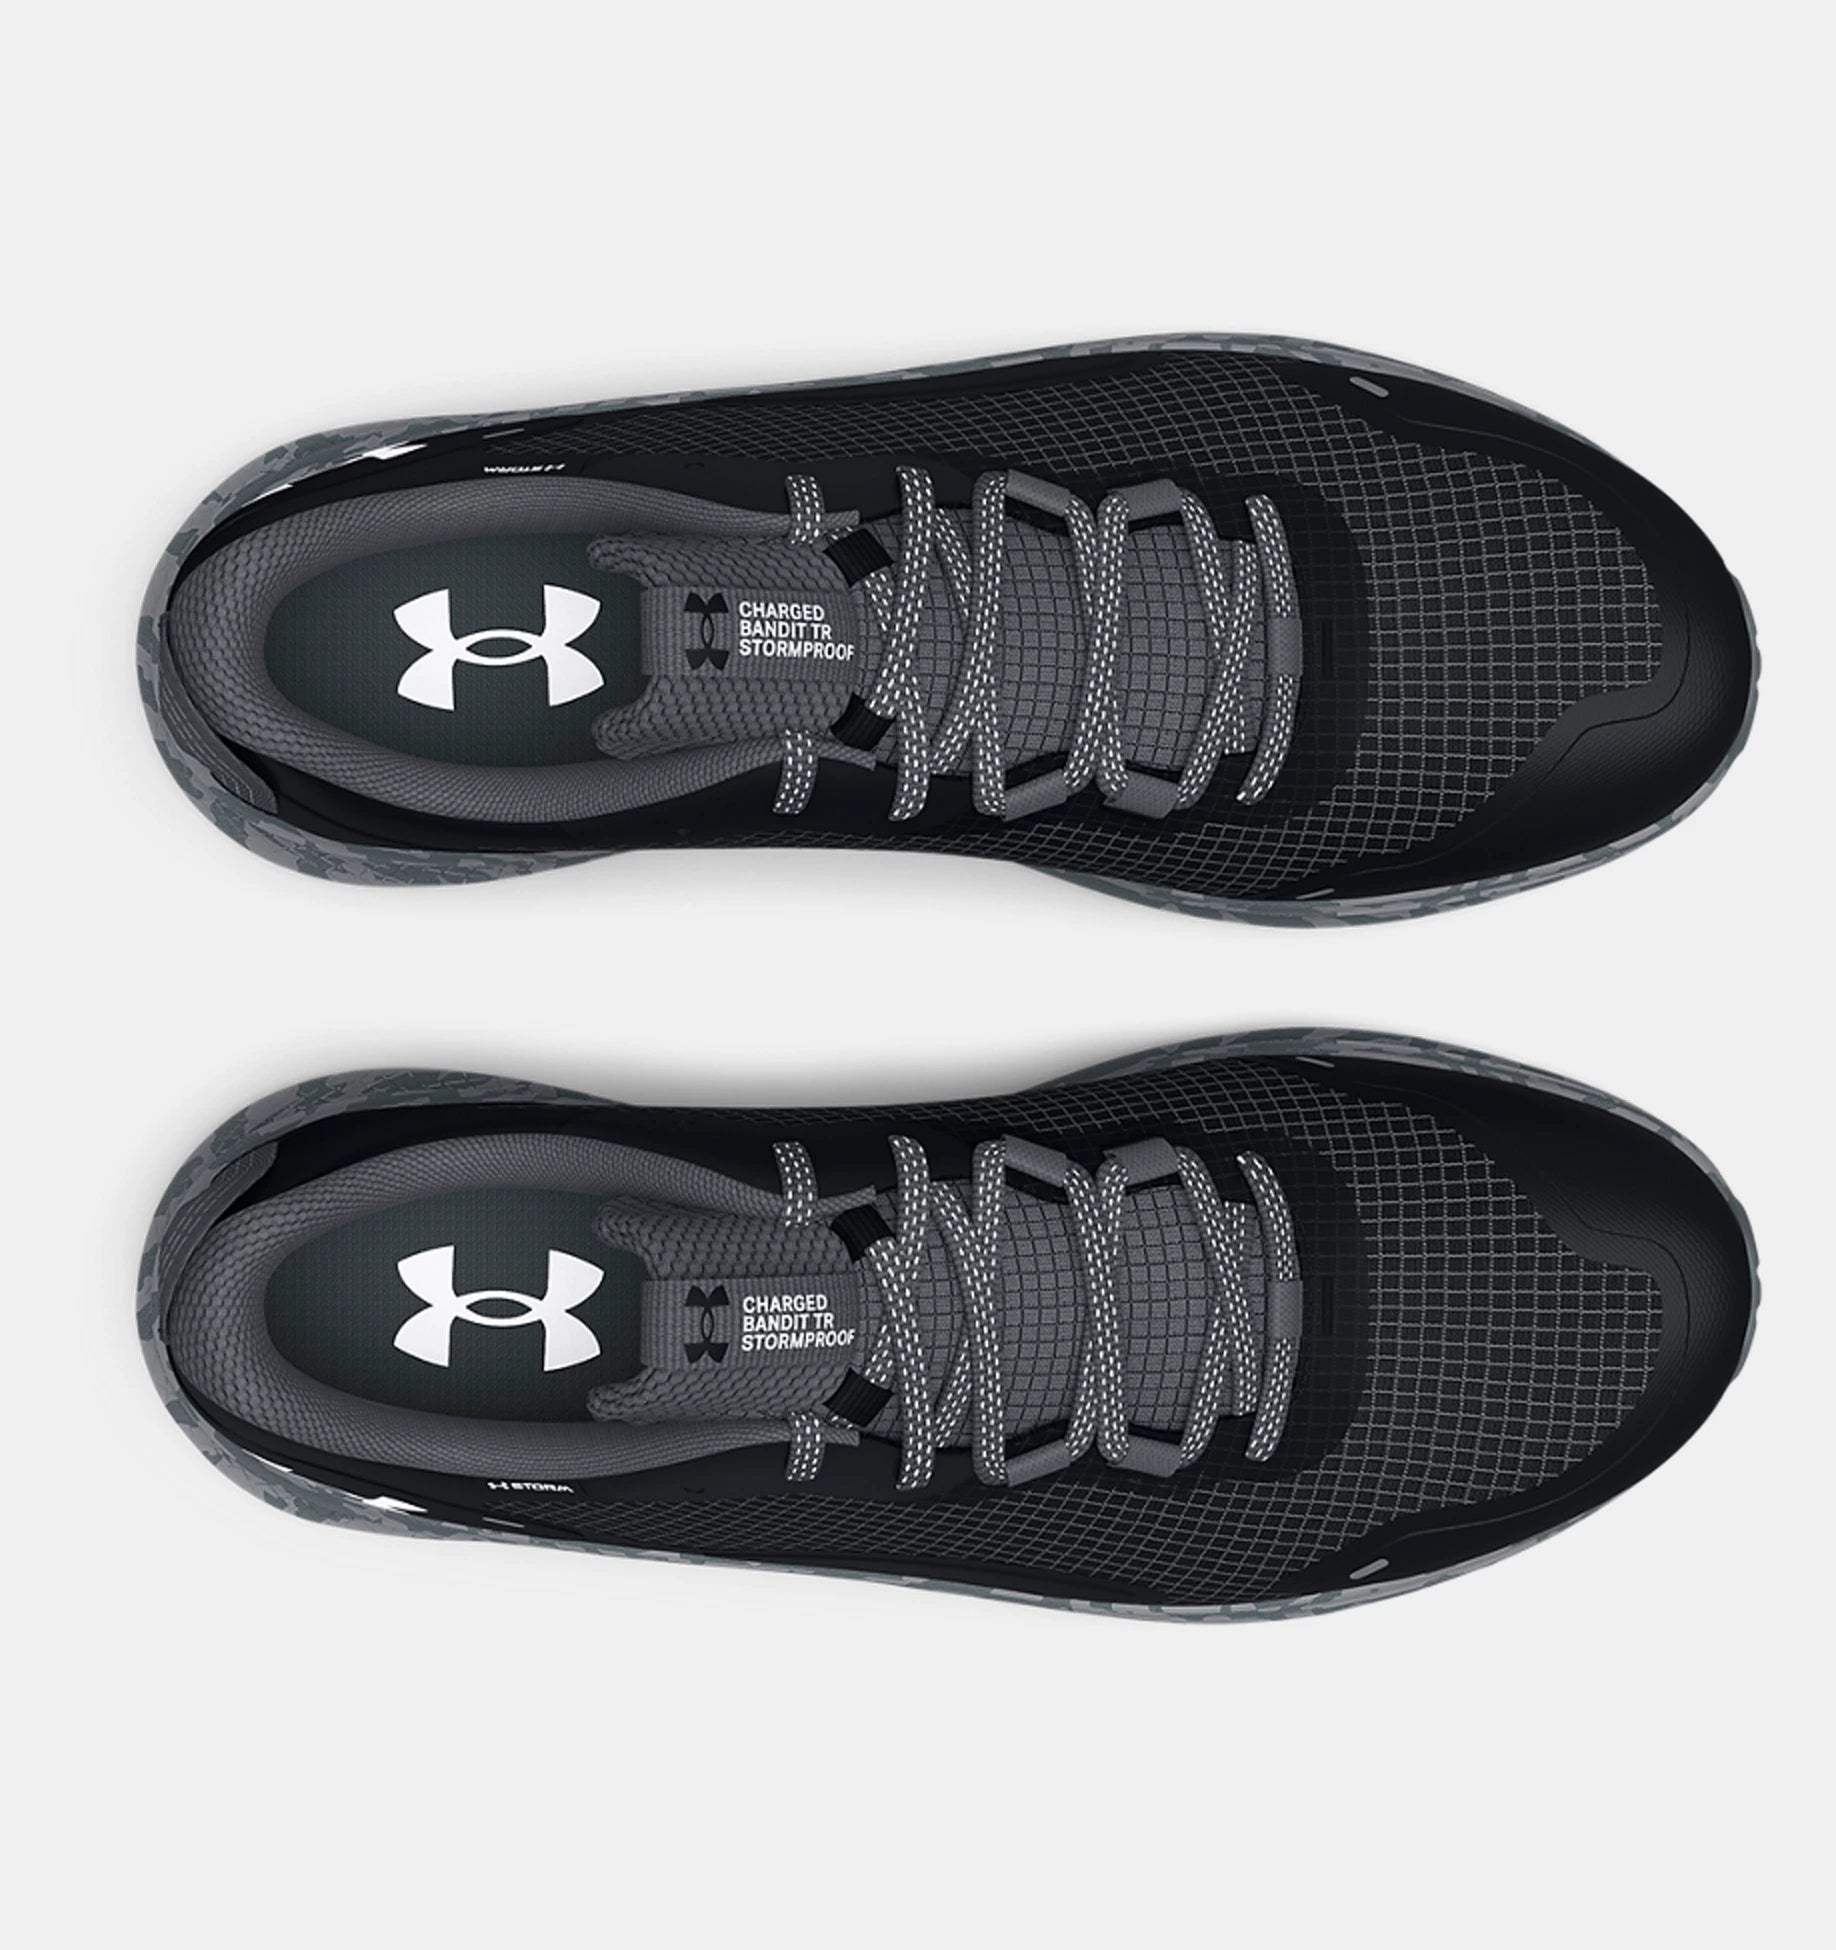 Under Armour Charged Bandit Trail 2 Trainer Black